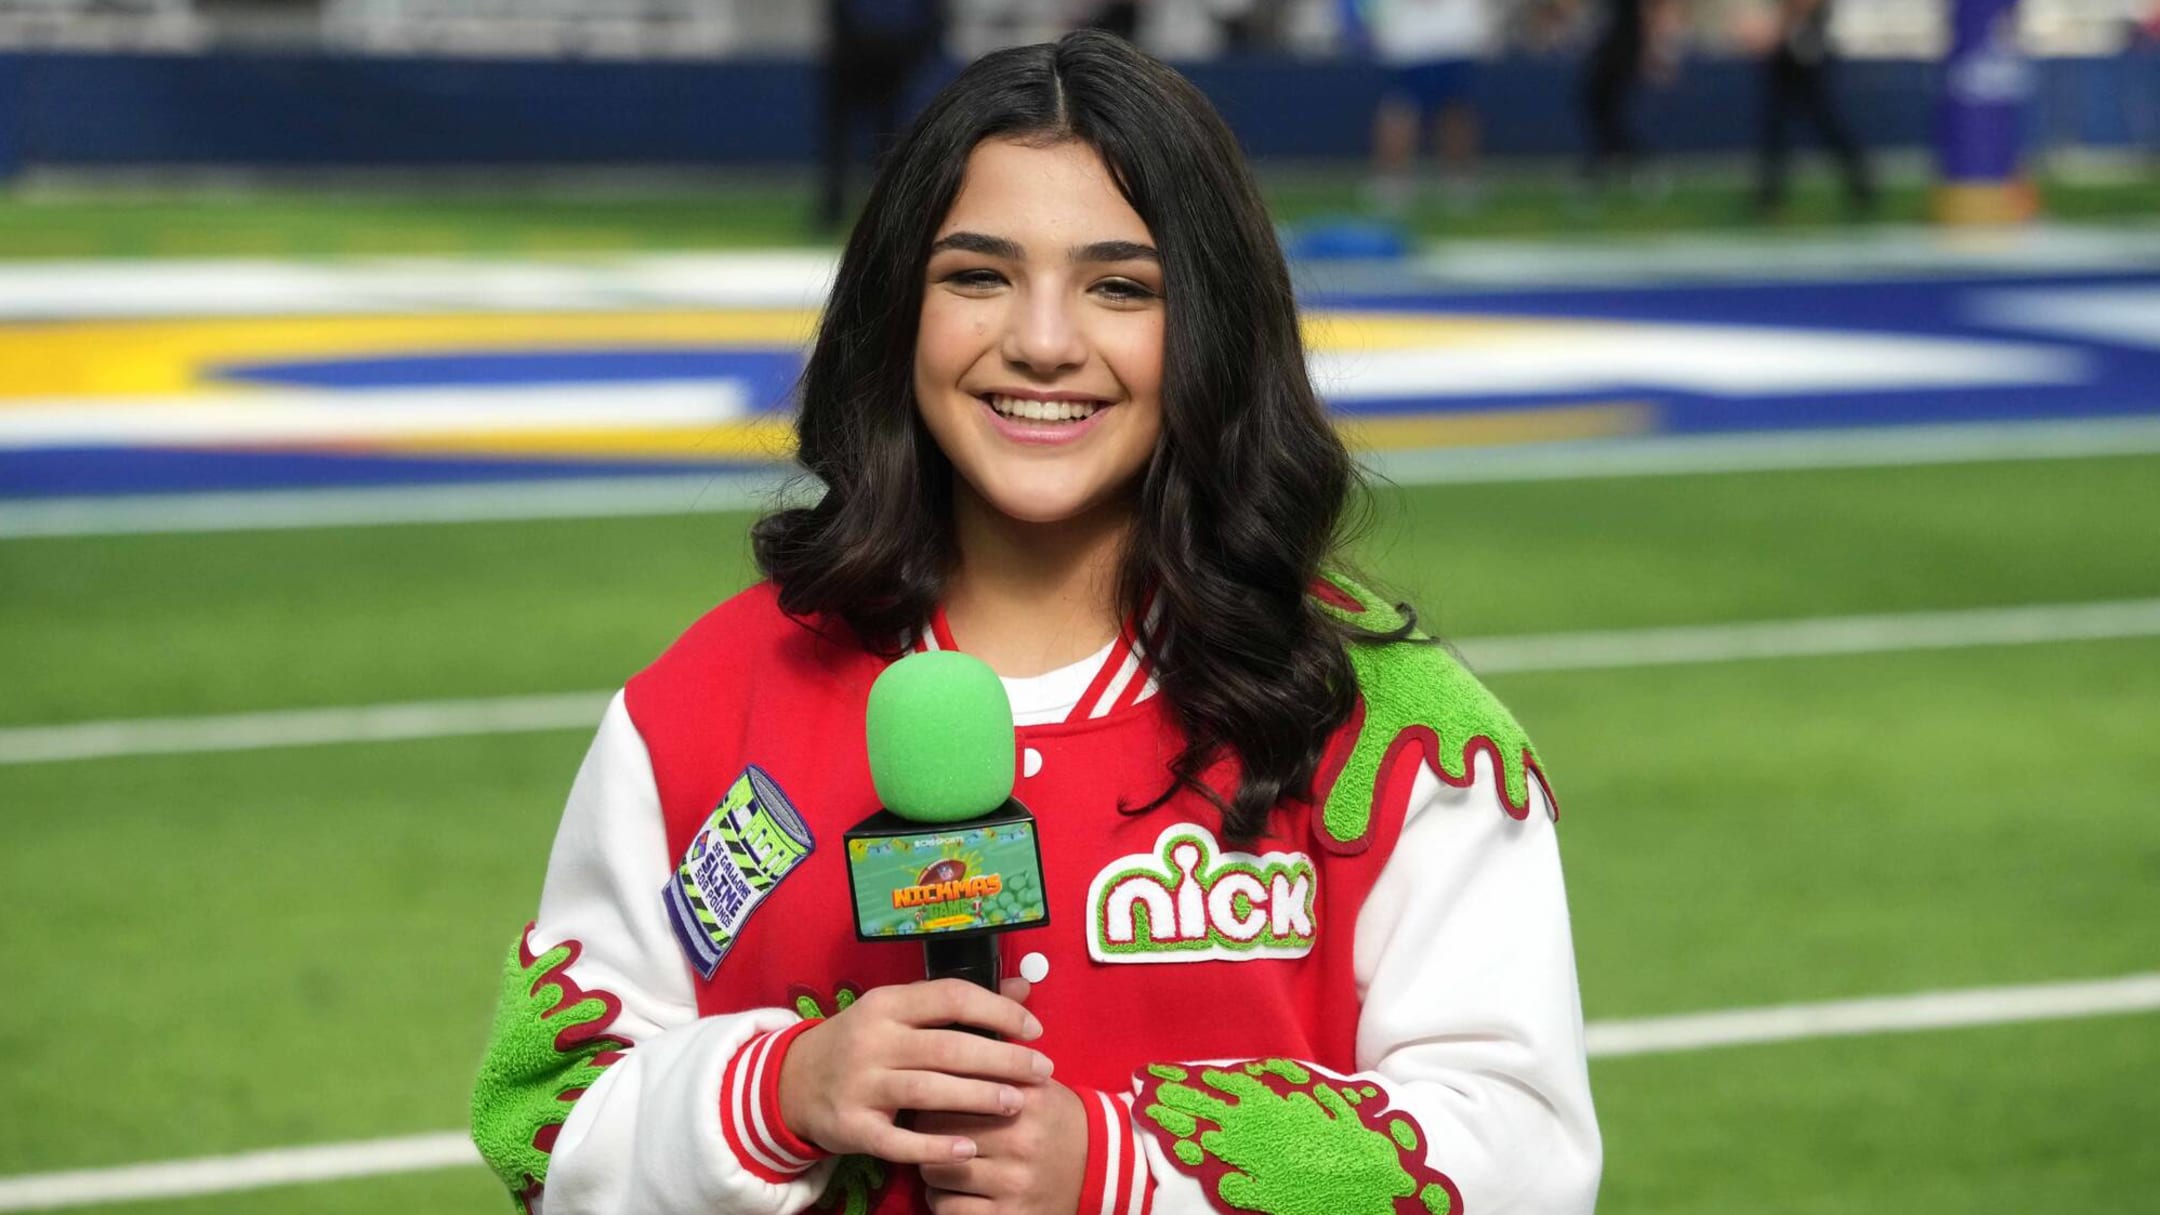 NFL Returns to Nickelodeon With First Alternate Super Bowl